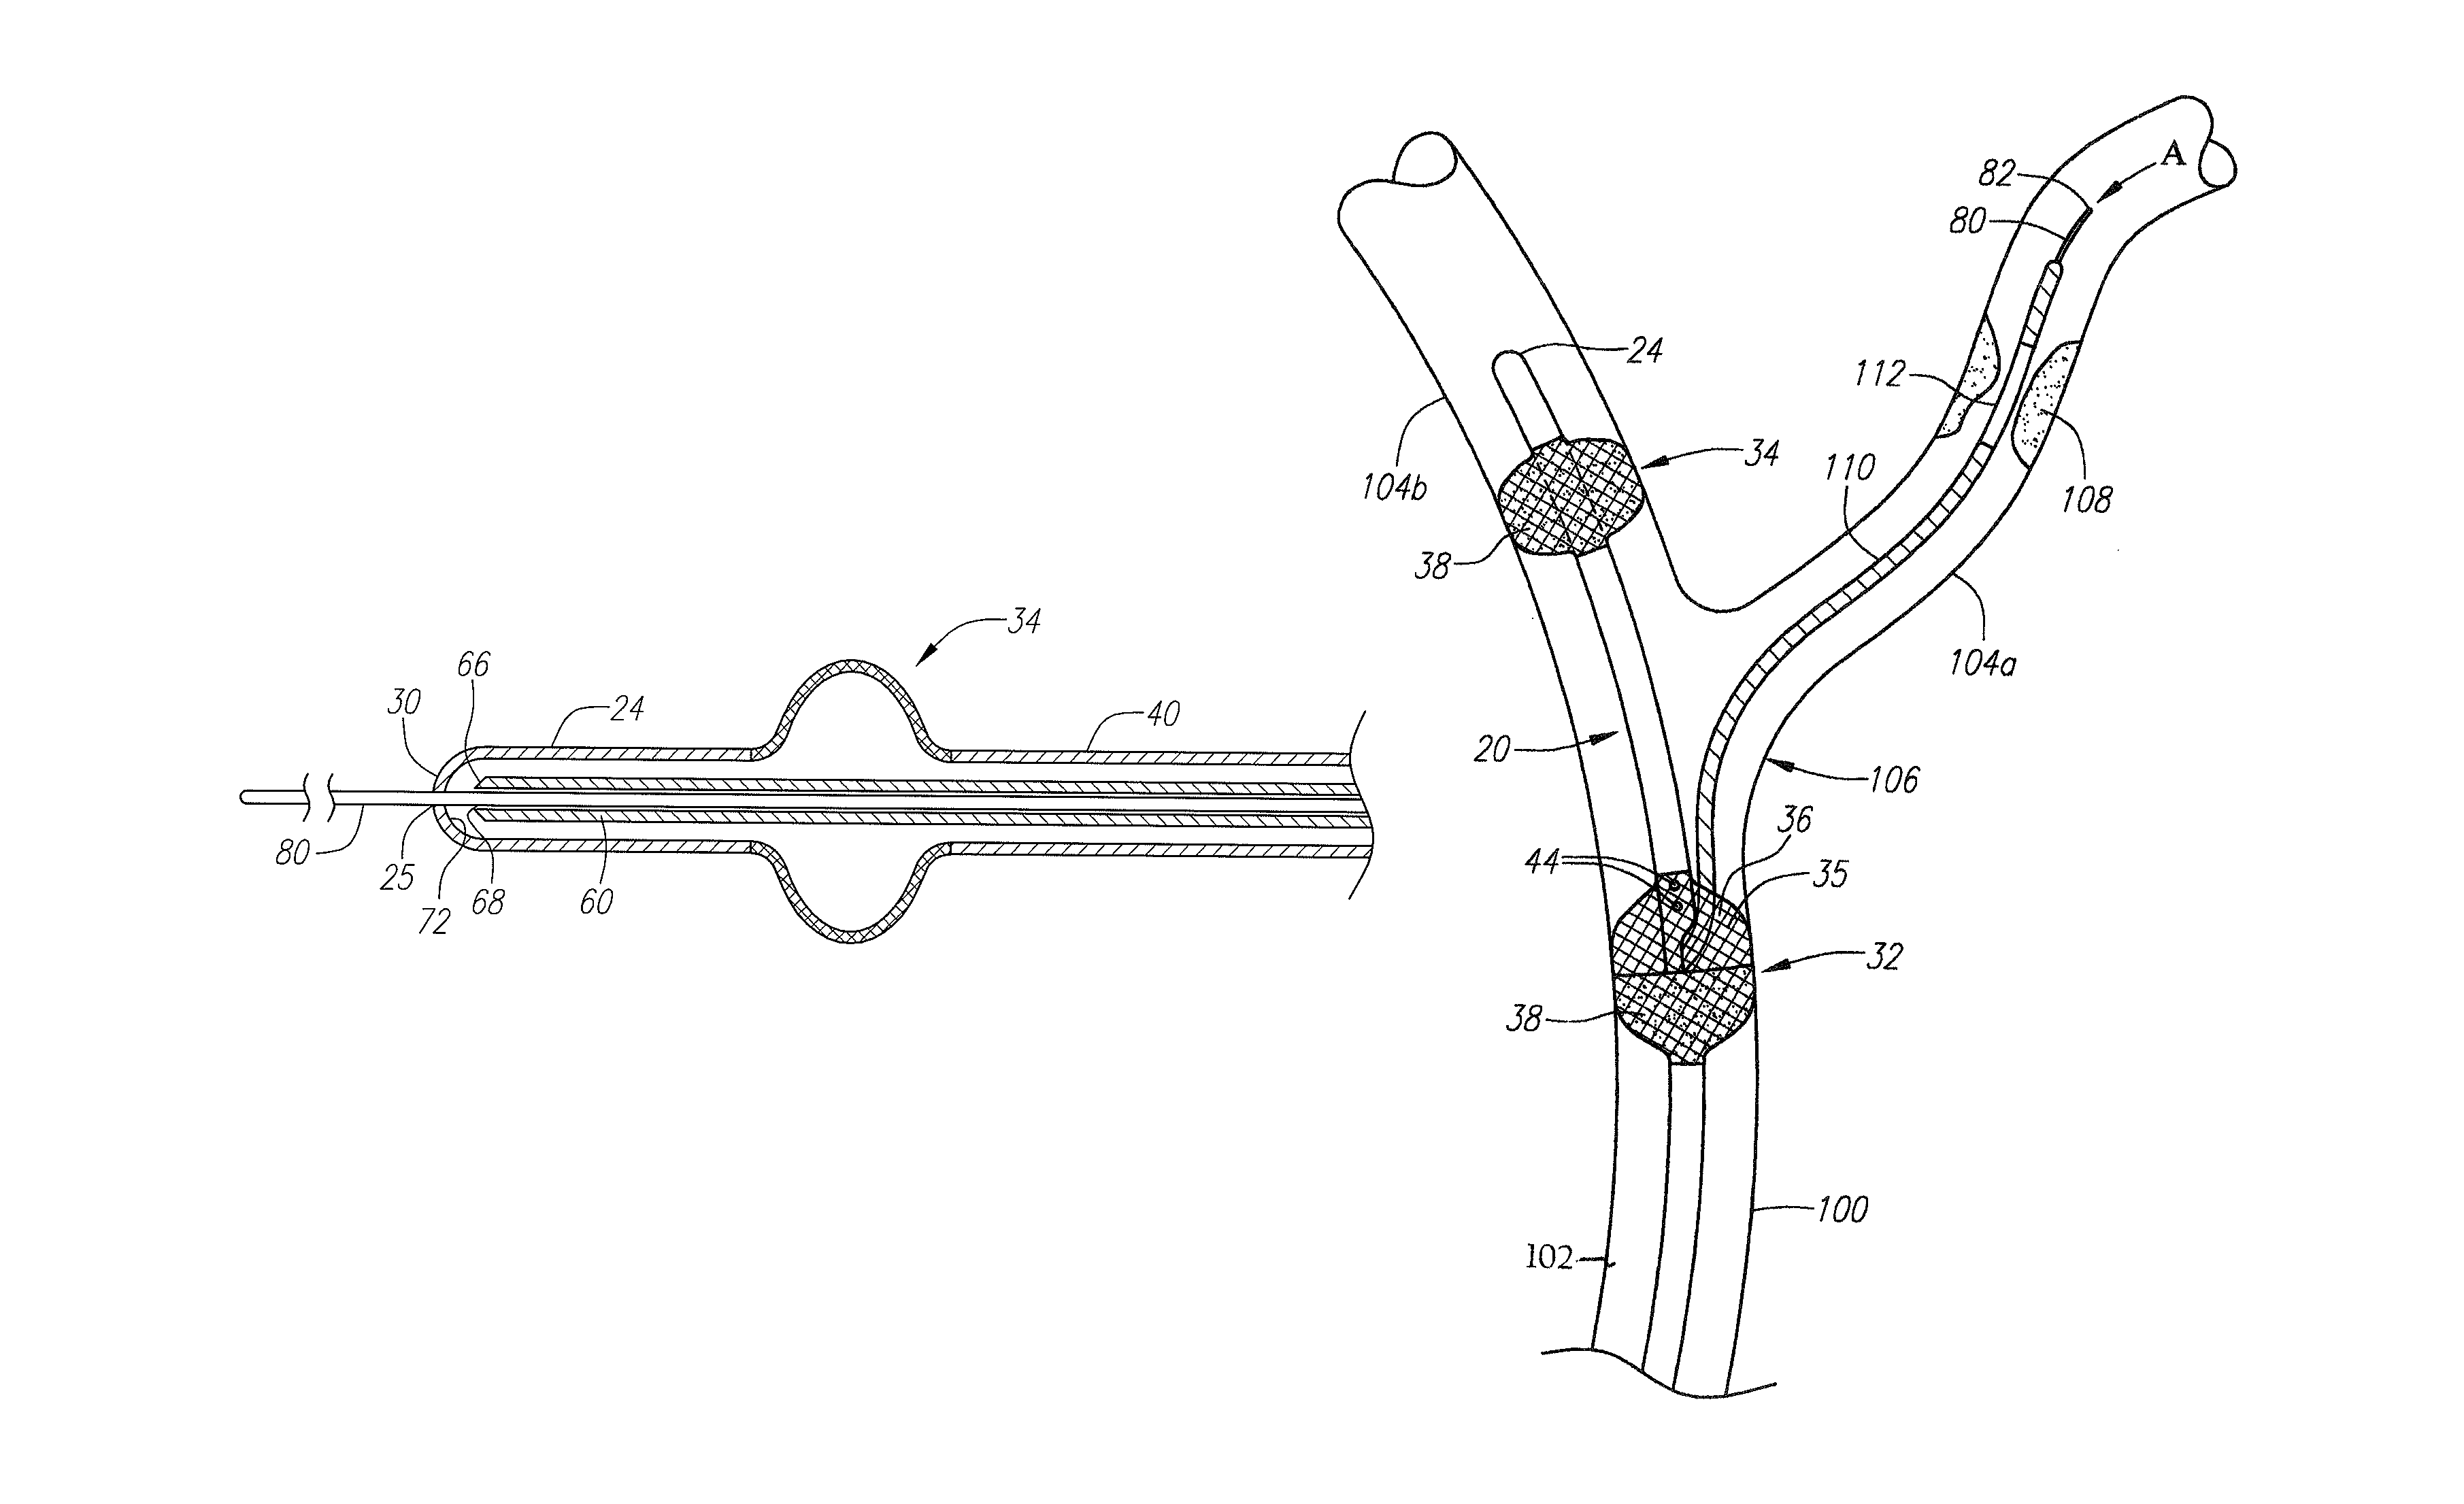 Occlusion device and method of use